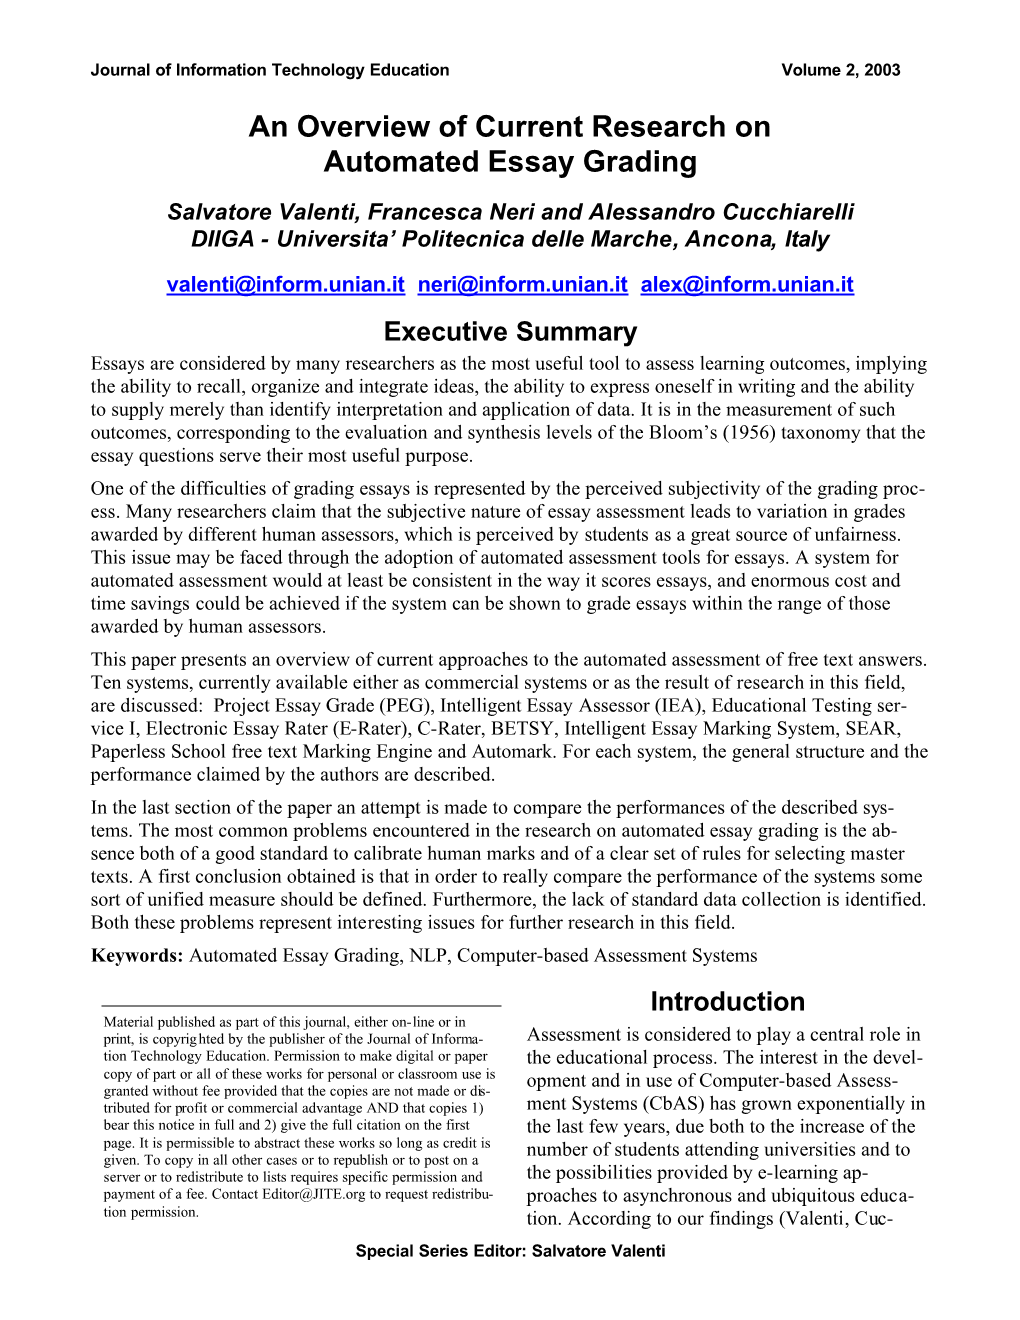 An Overview of Current Research on Automated Essay Grading